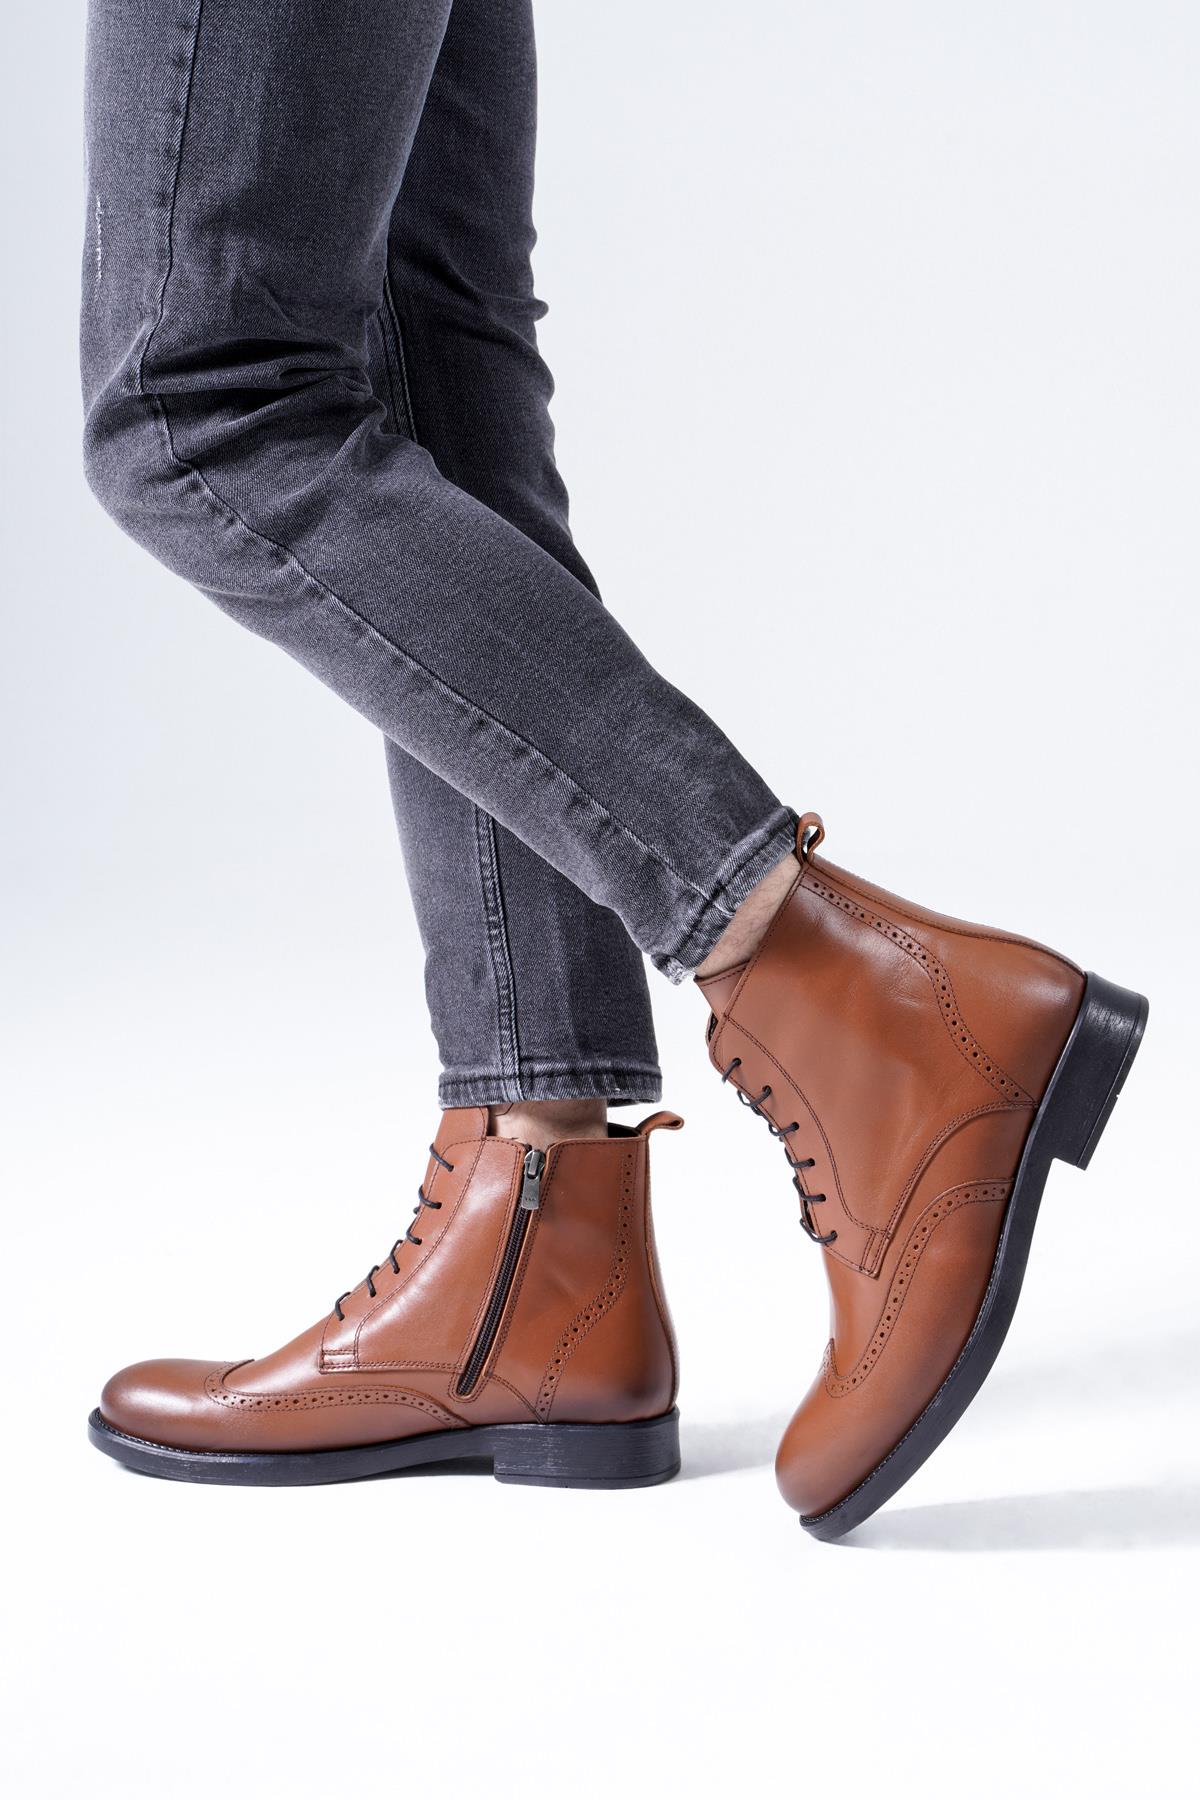 Men's Genuine Leather Boots